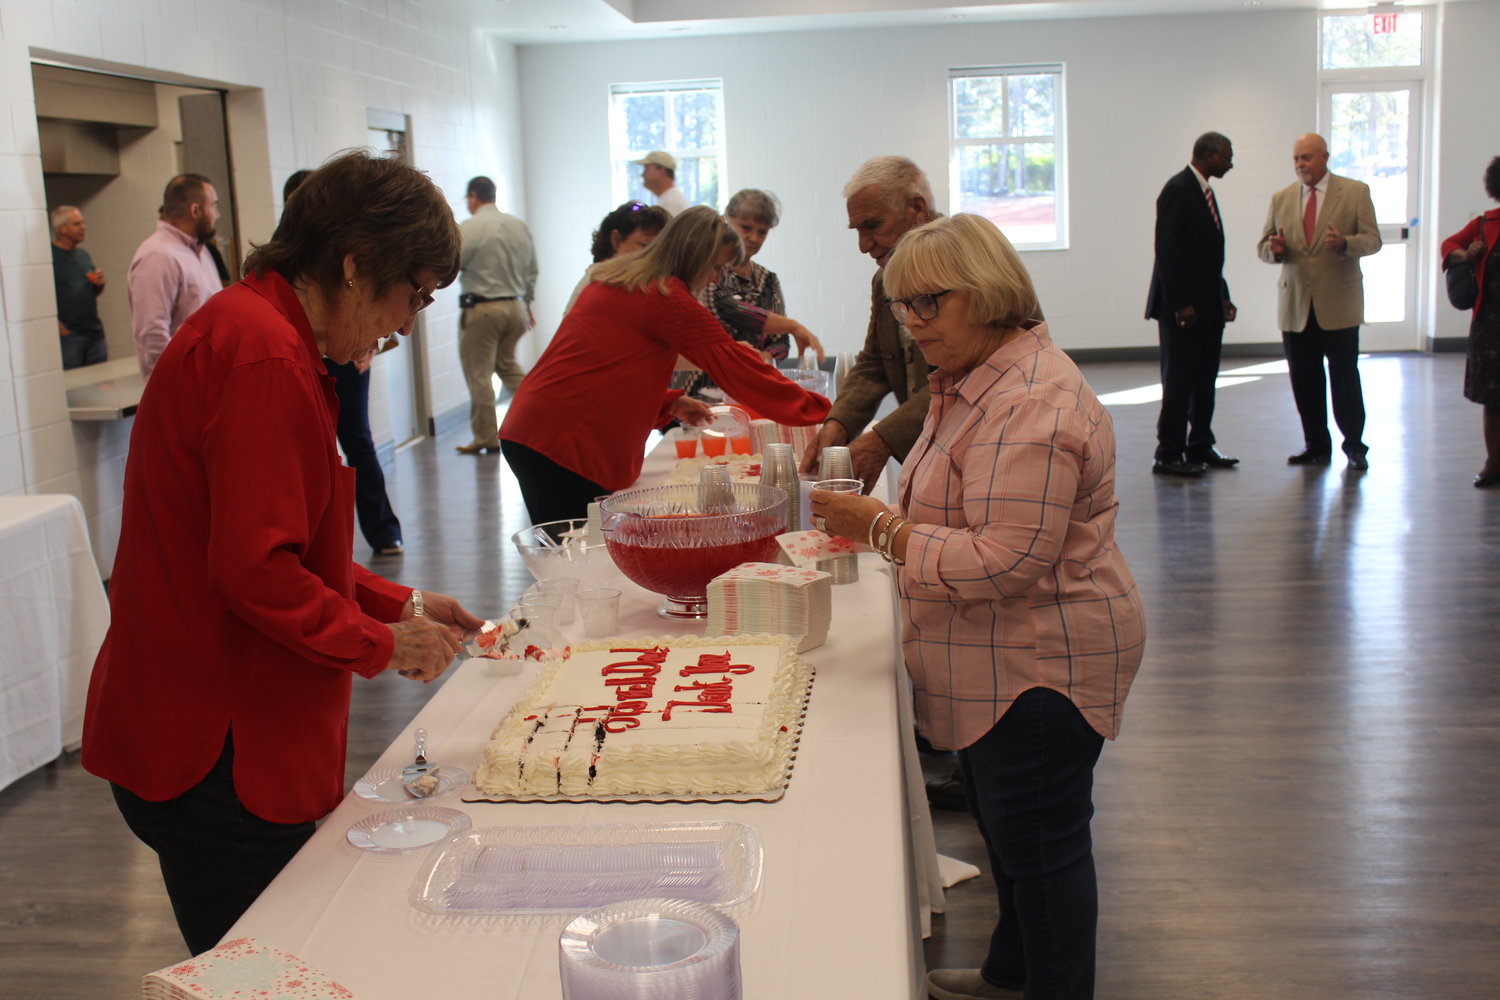 Residents enjoyed cake and refreshments, along with a tour of the facility.